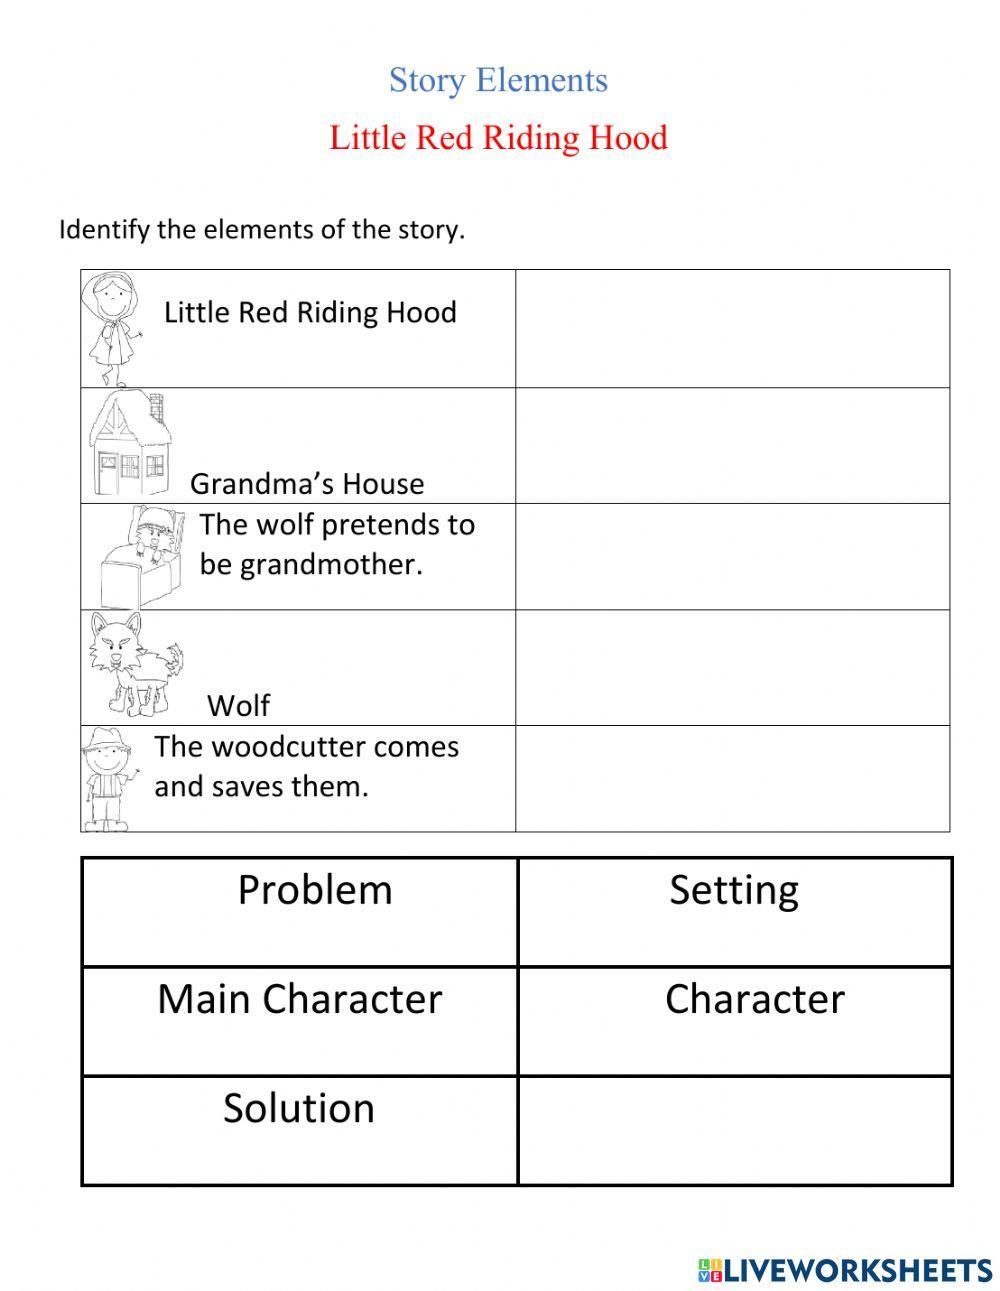 Little Red Riding Hood Story Elements